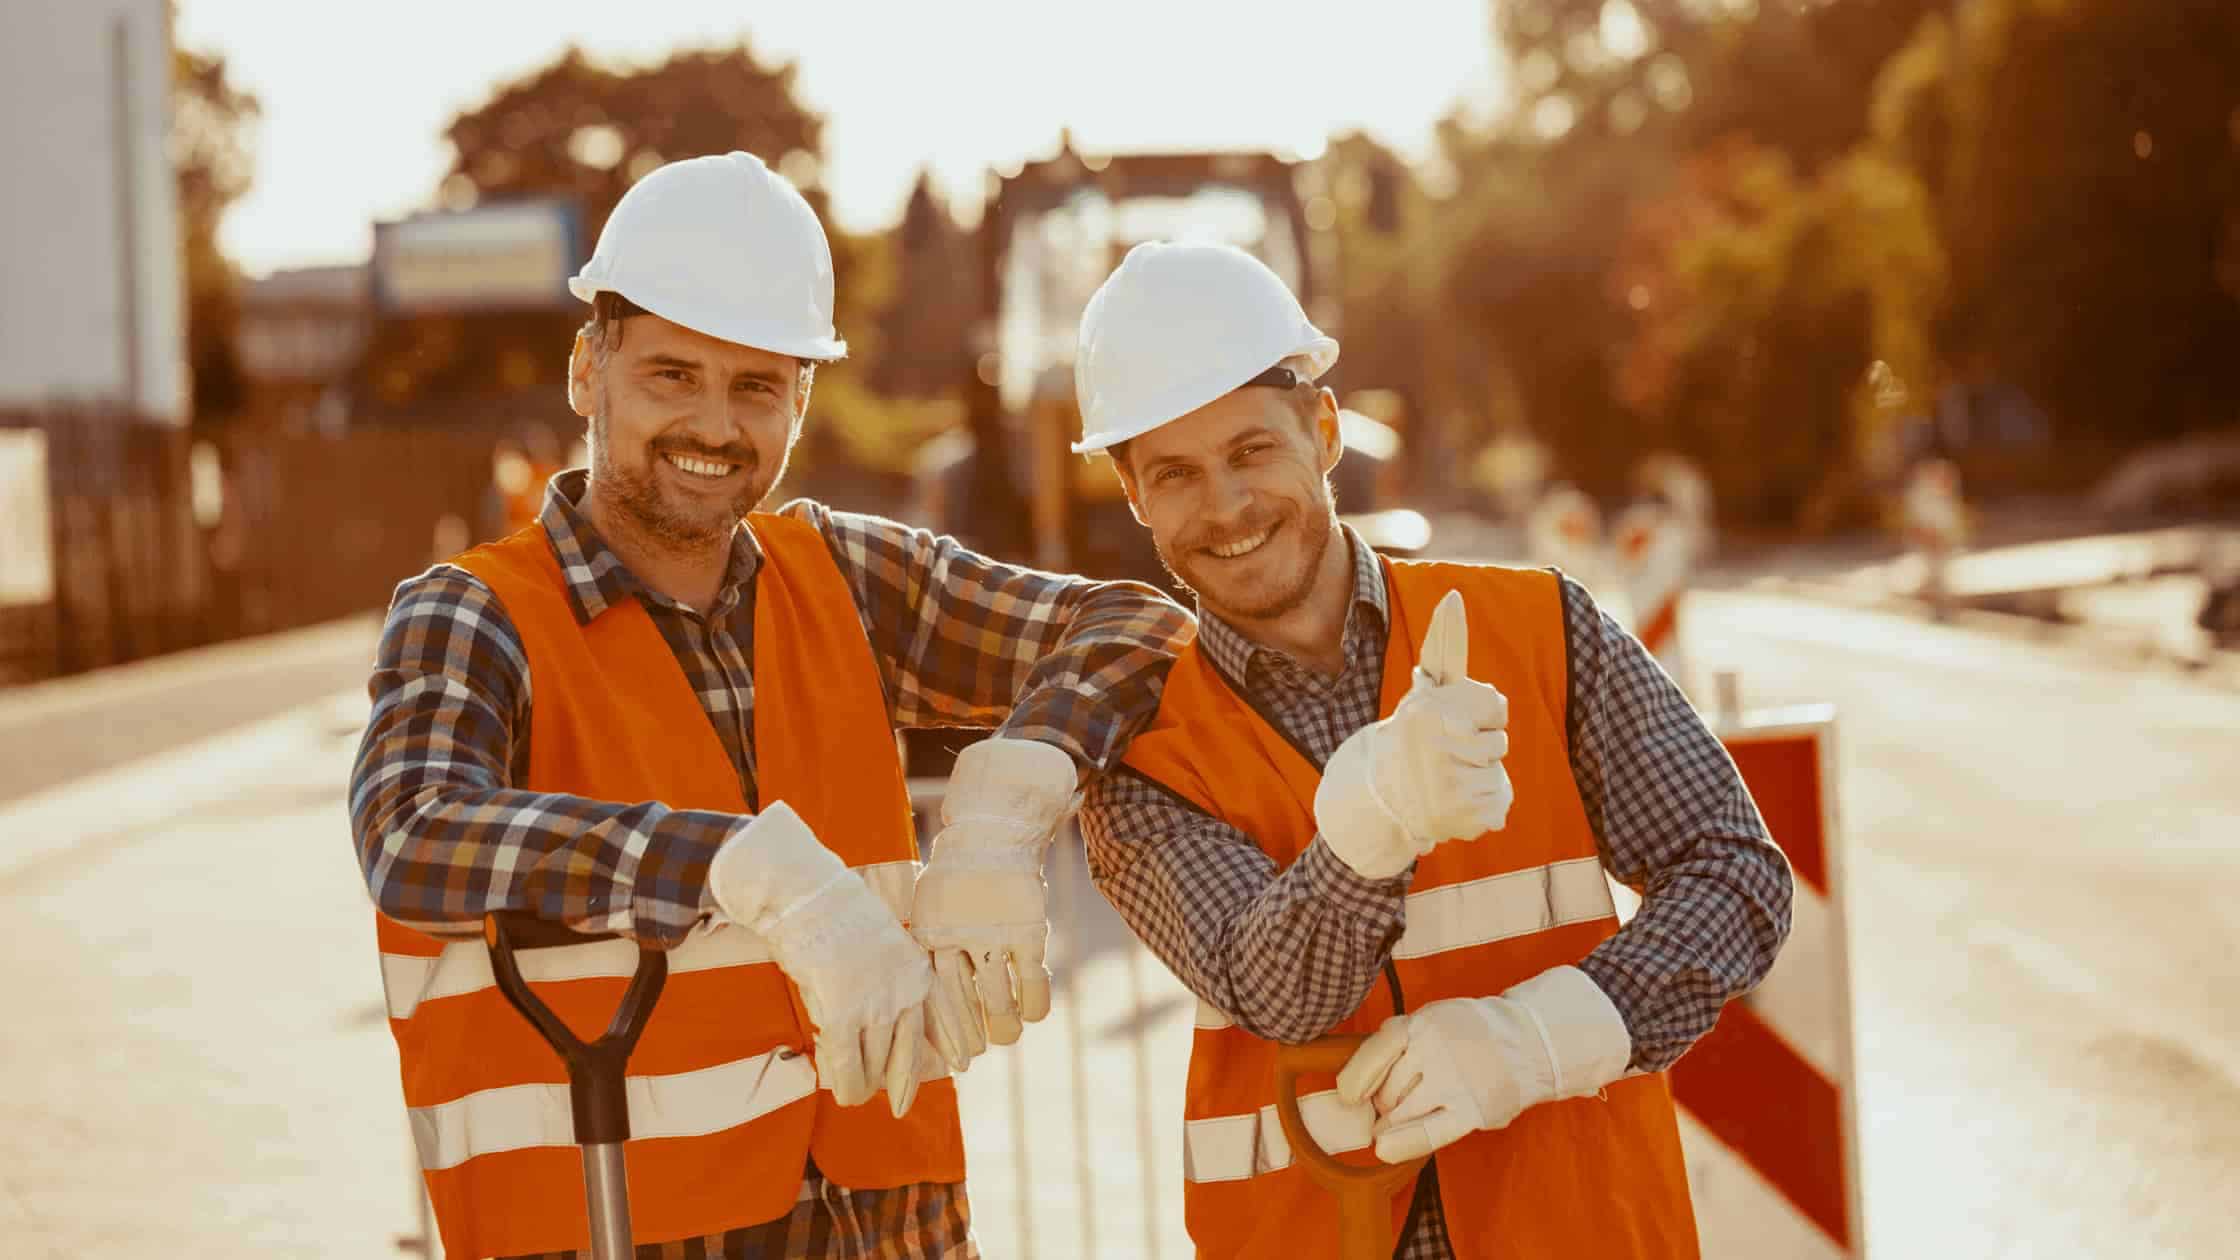 Why Small Construction Companies Need To Invest In Their Workers